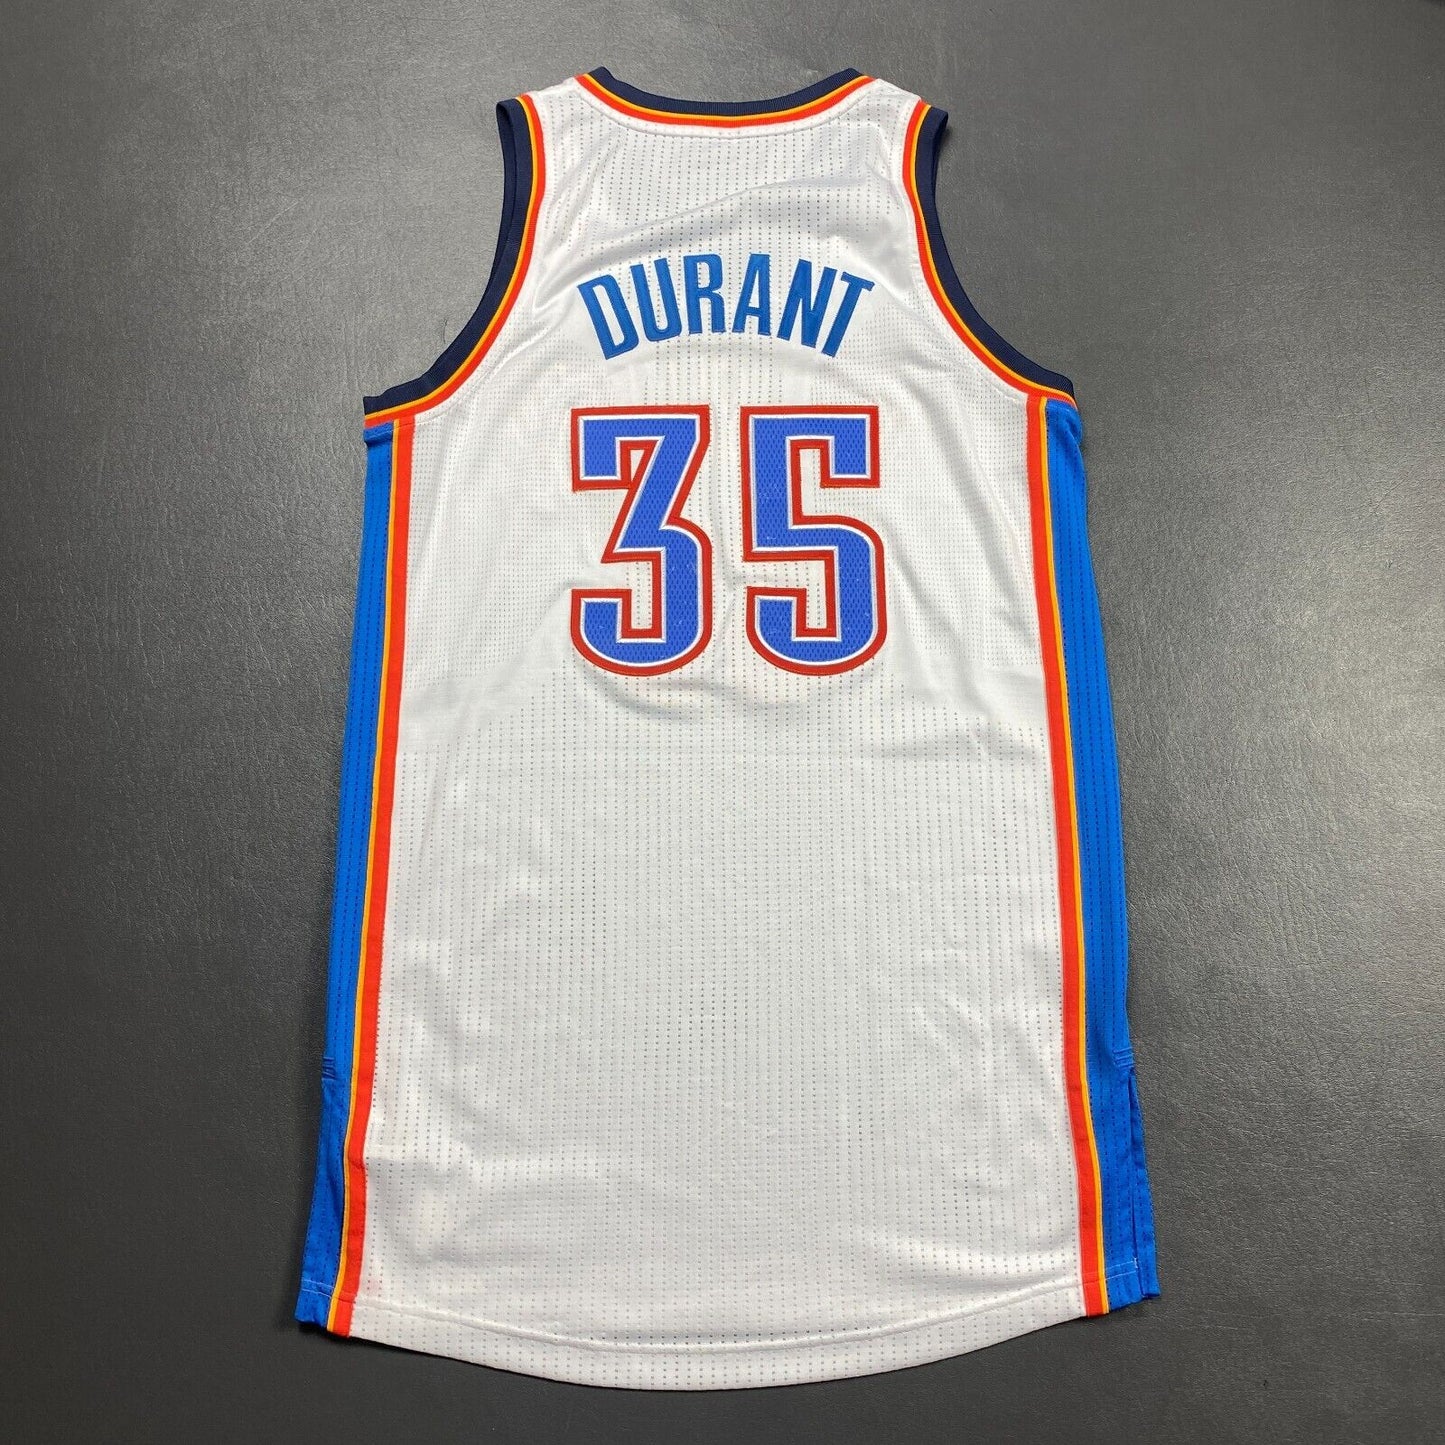 100% Authentic Kevin Durant Adidas Thunders 2012 NBA Finals Jersey Size L Mens